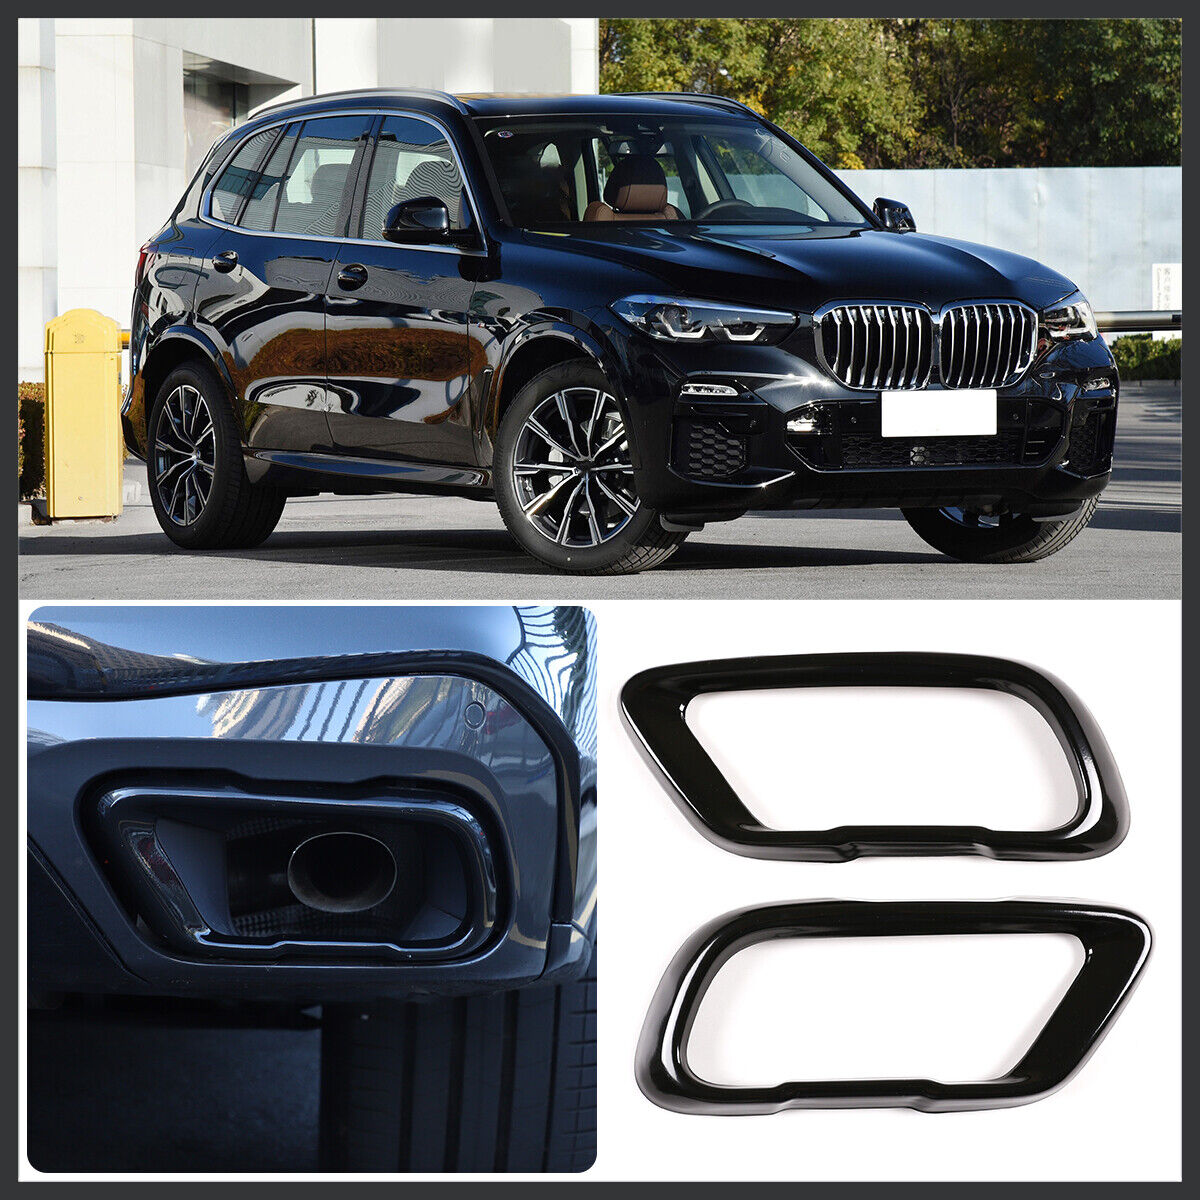 Black Steel Rear Muffler Exhaust Tail Pipe Cover Trim For BMW X5 G05 19-21